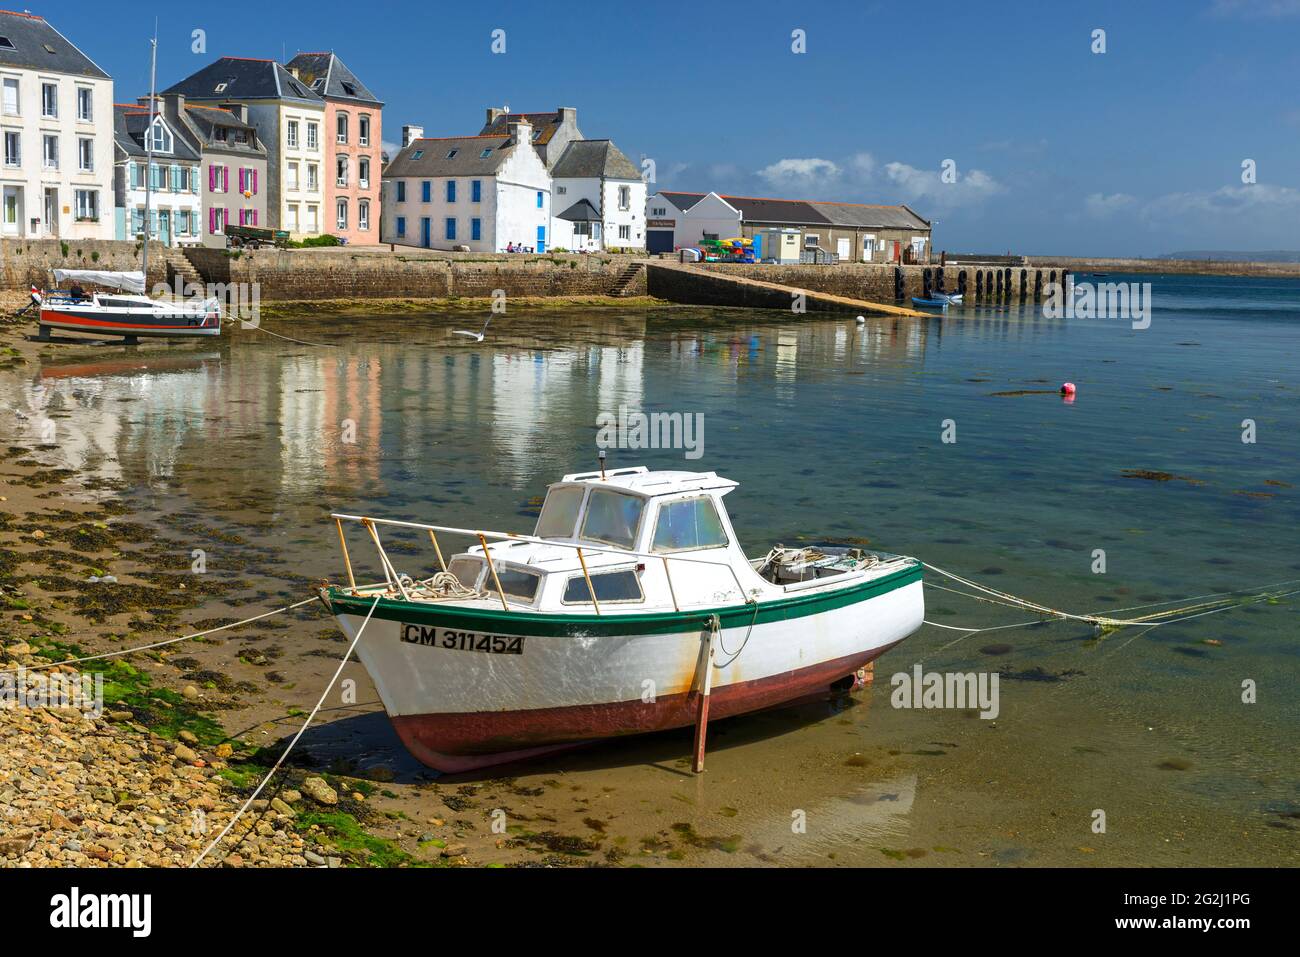 Île de Sein, colorful houses and boats in the harbor, France, Brittany, Finistère department Stock Photo